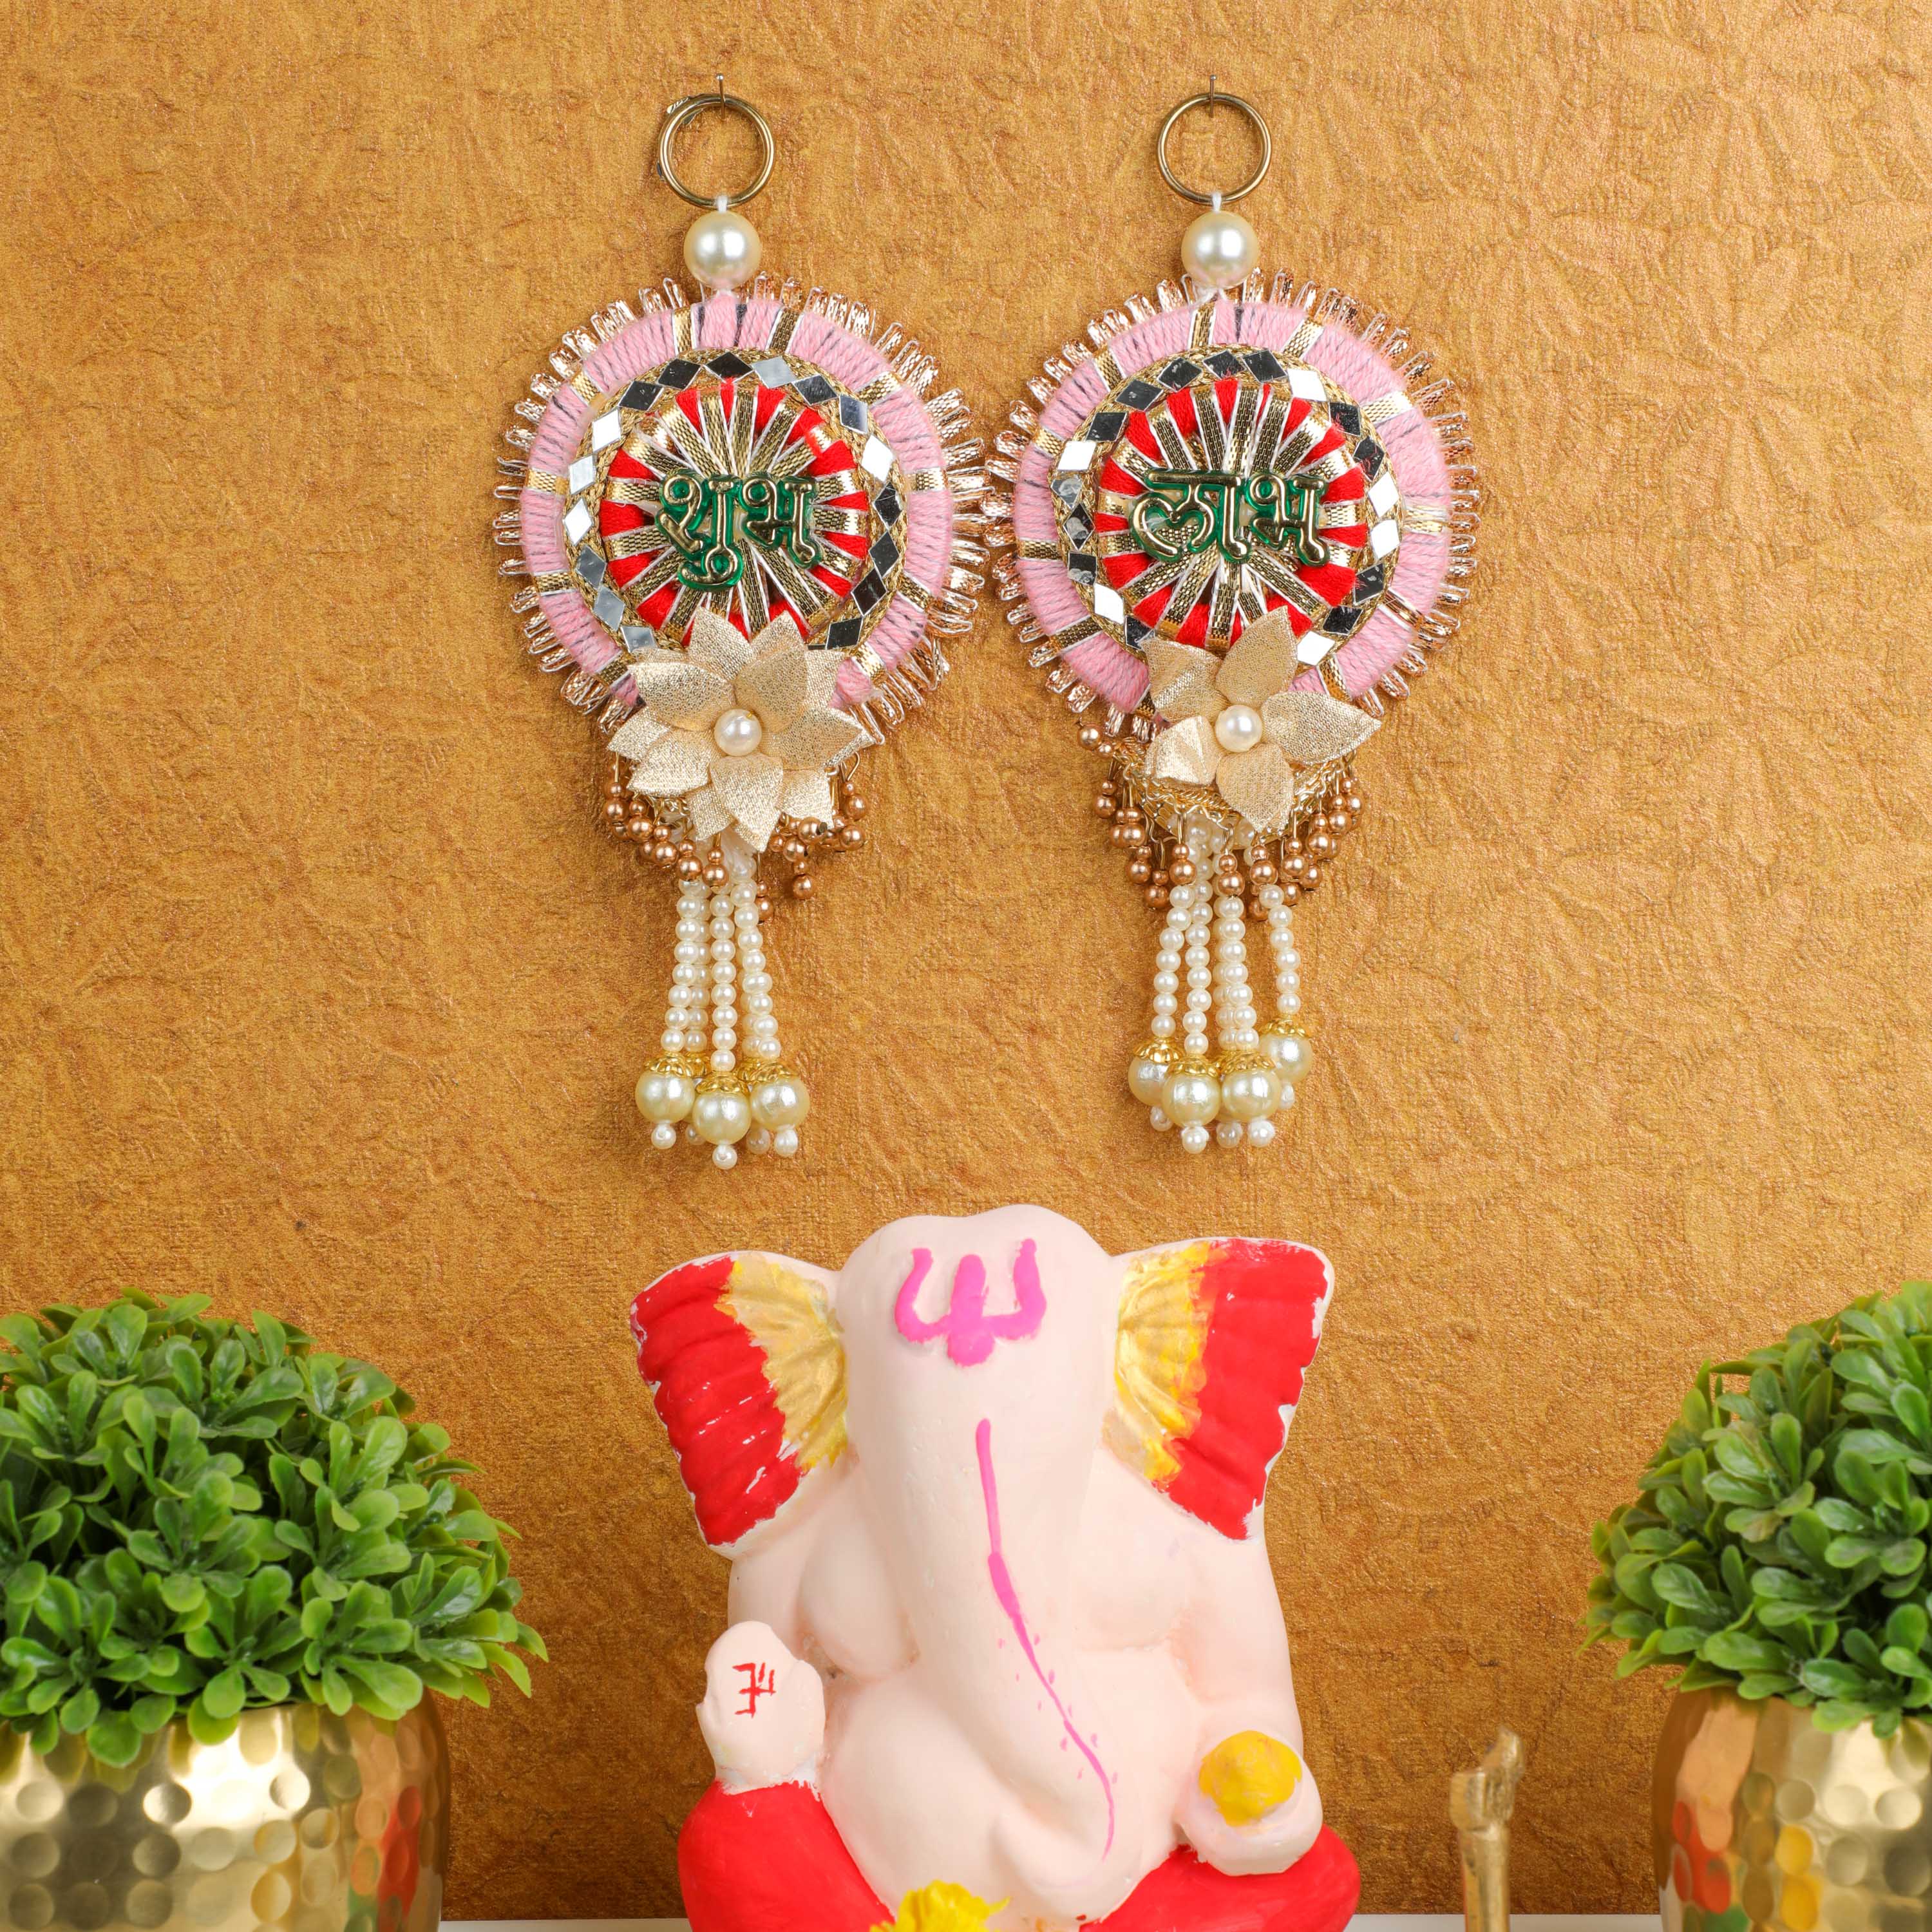 Buy Indian Fabric Wall Hangings Online in USA & Canada - Desifavors